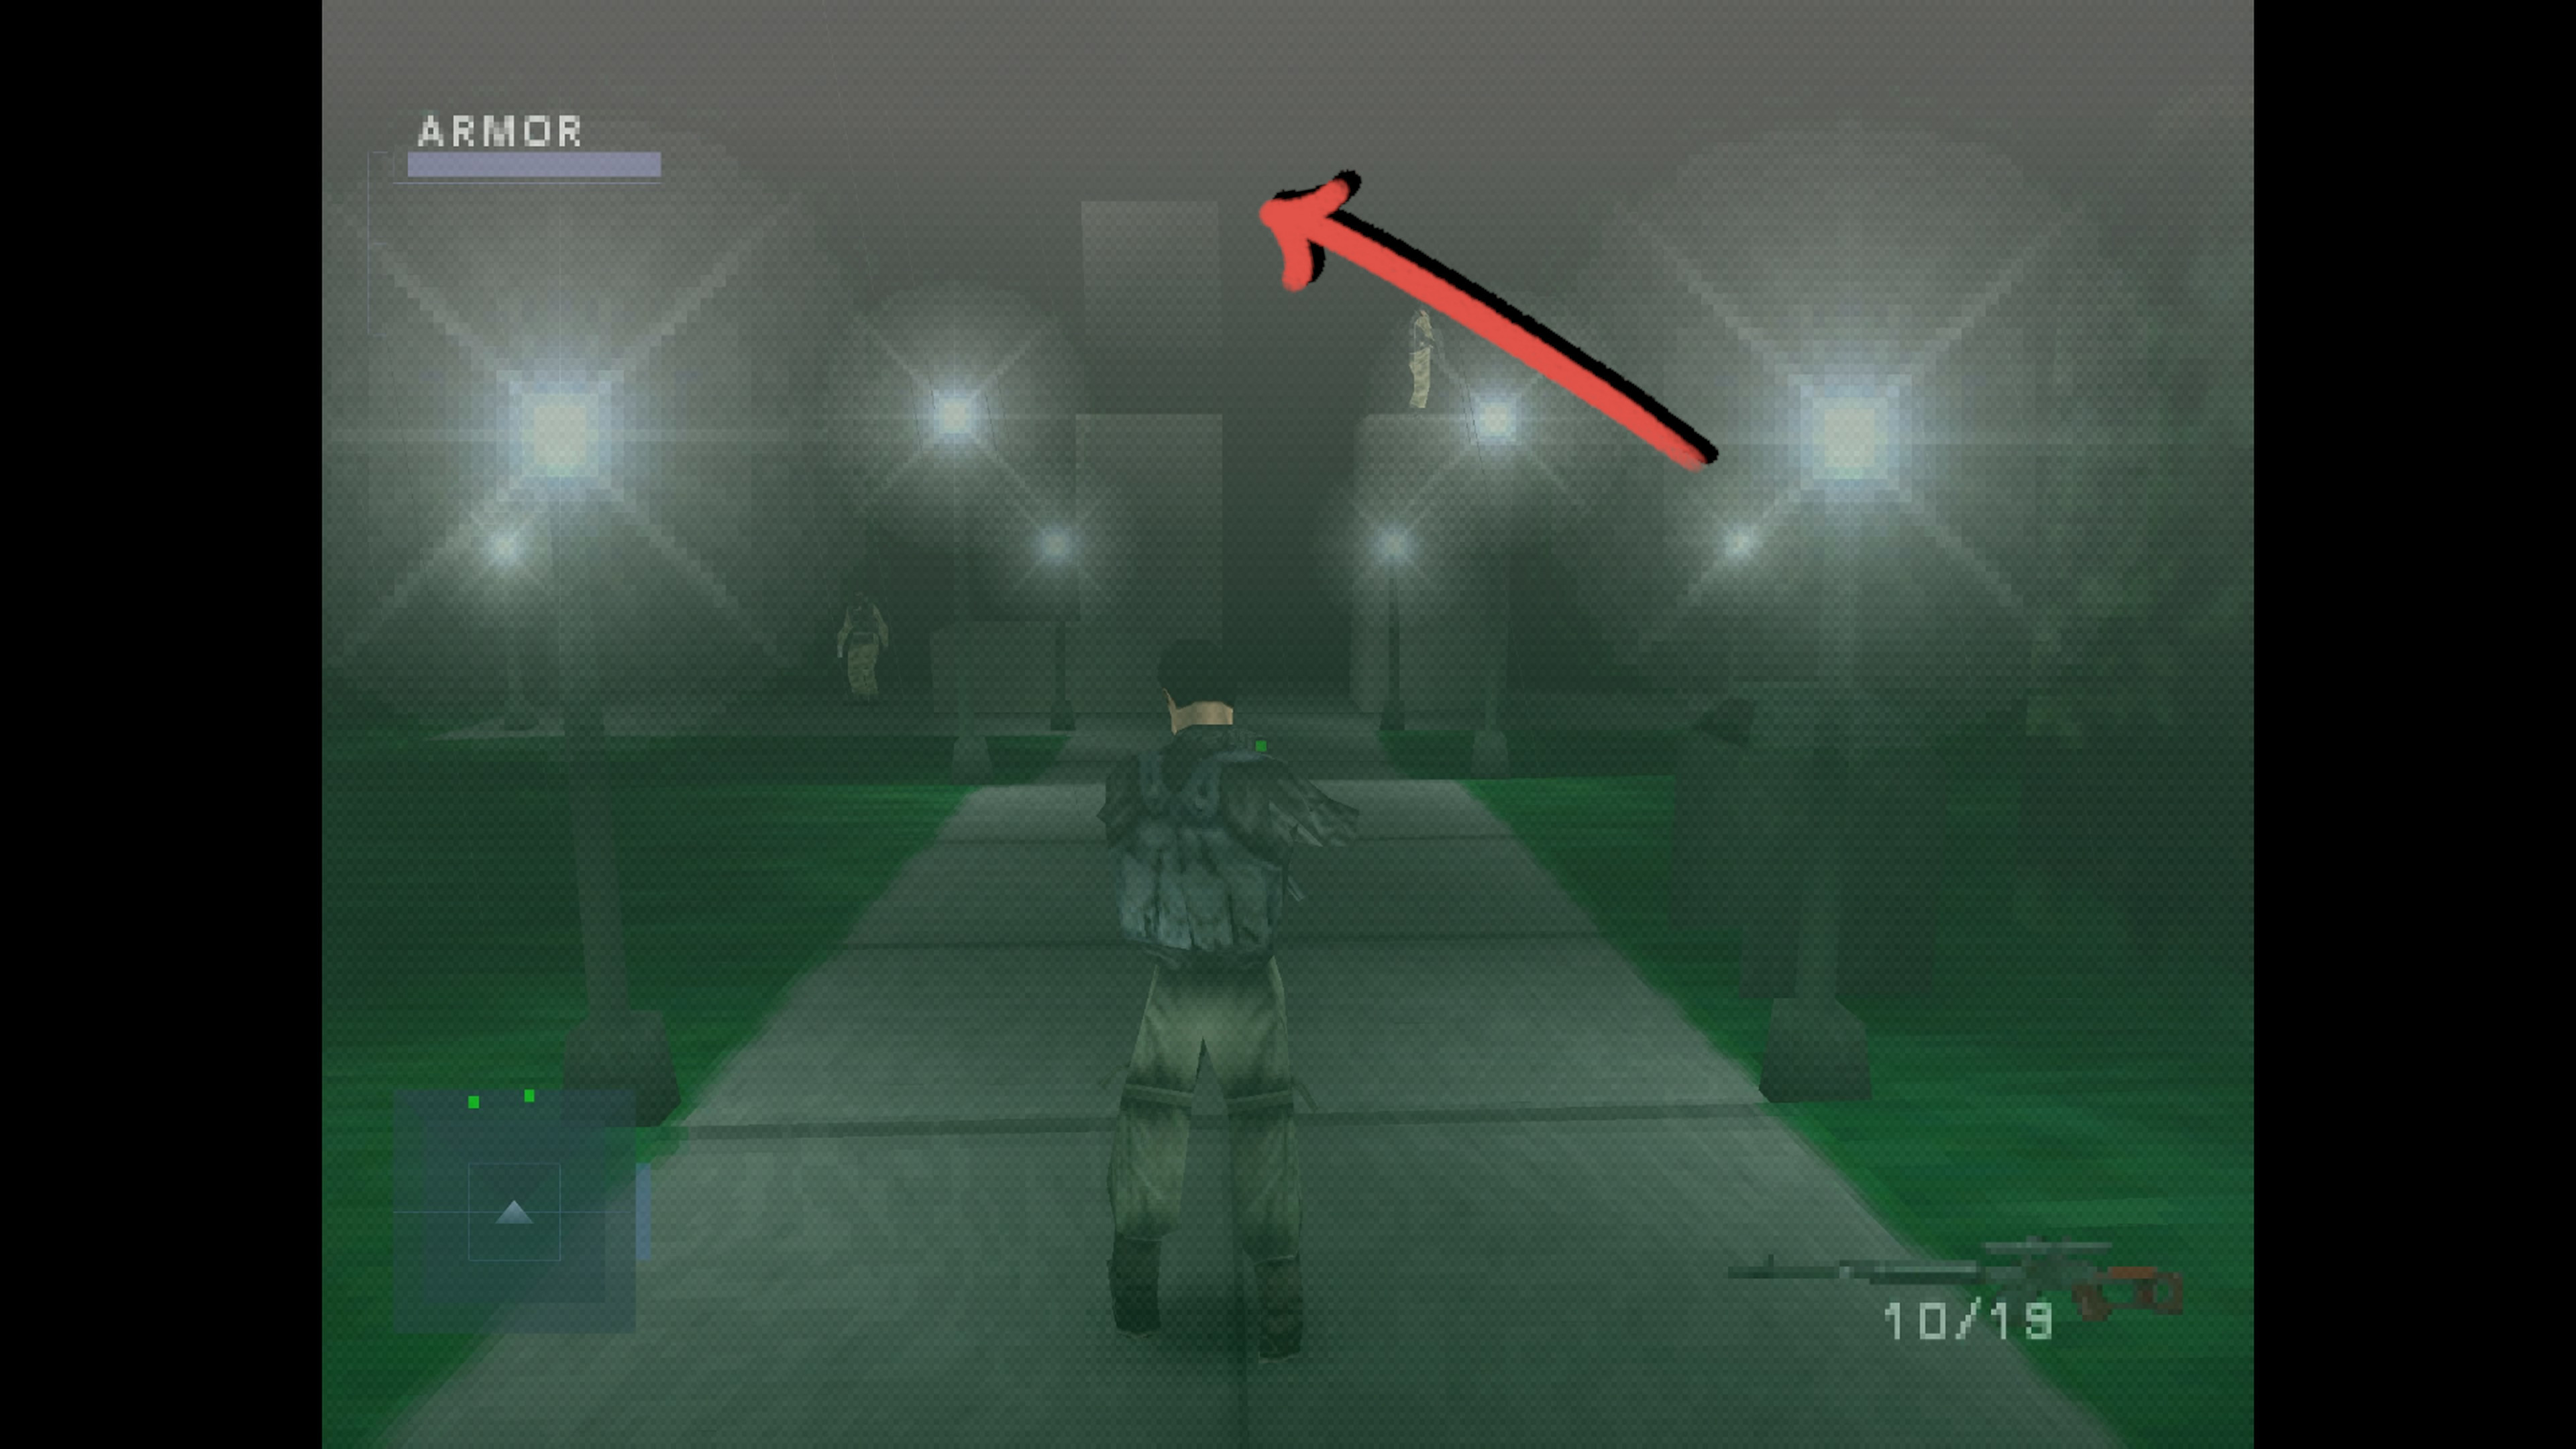 Waterfront, Syphon Filter Wiki